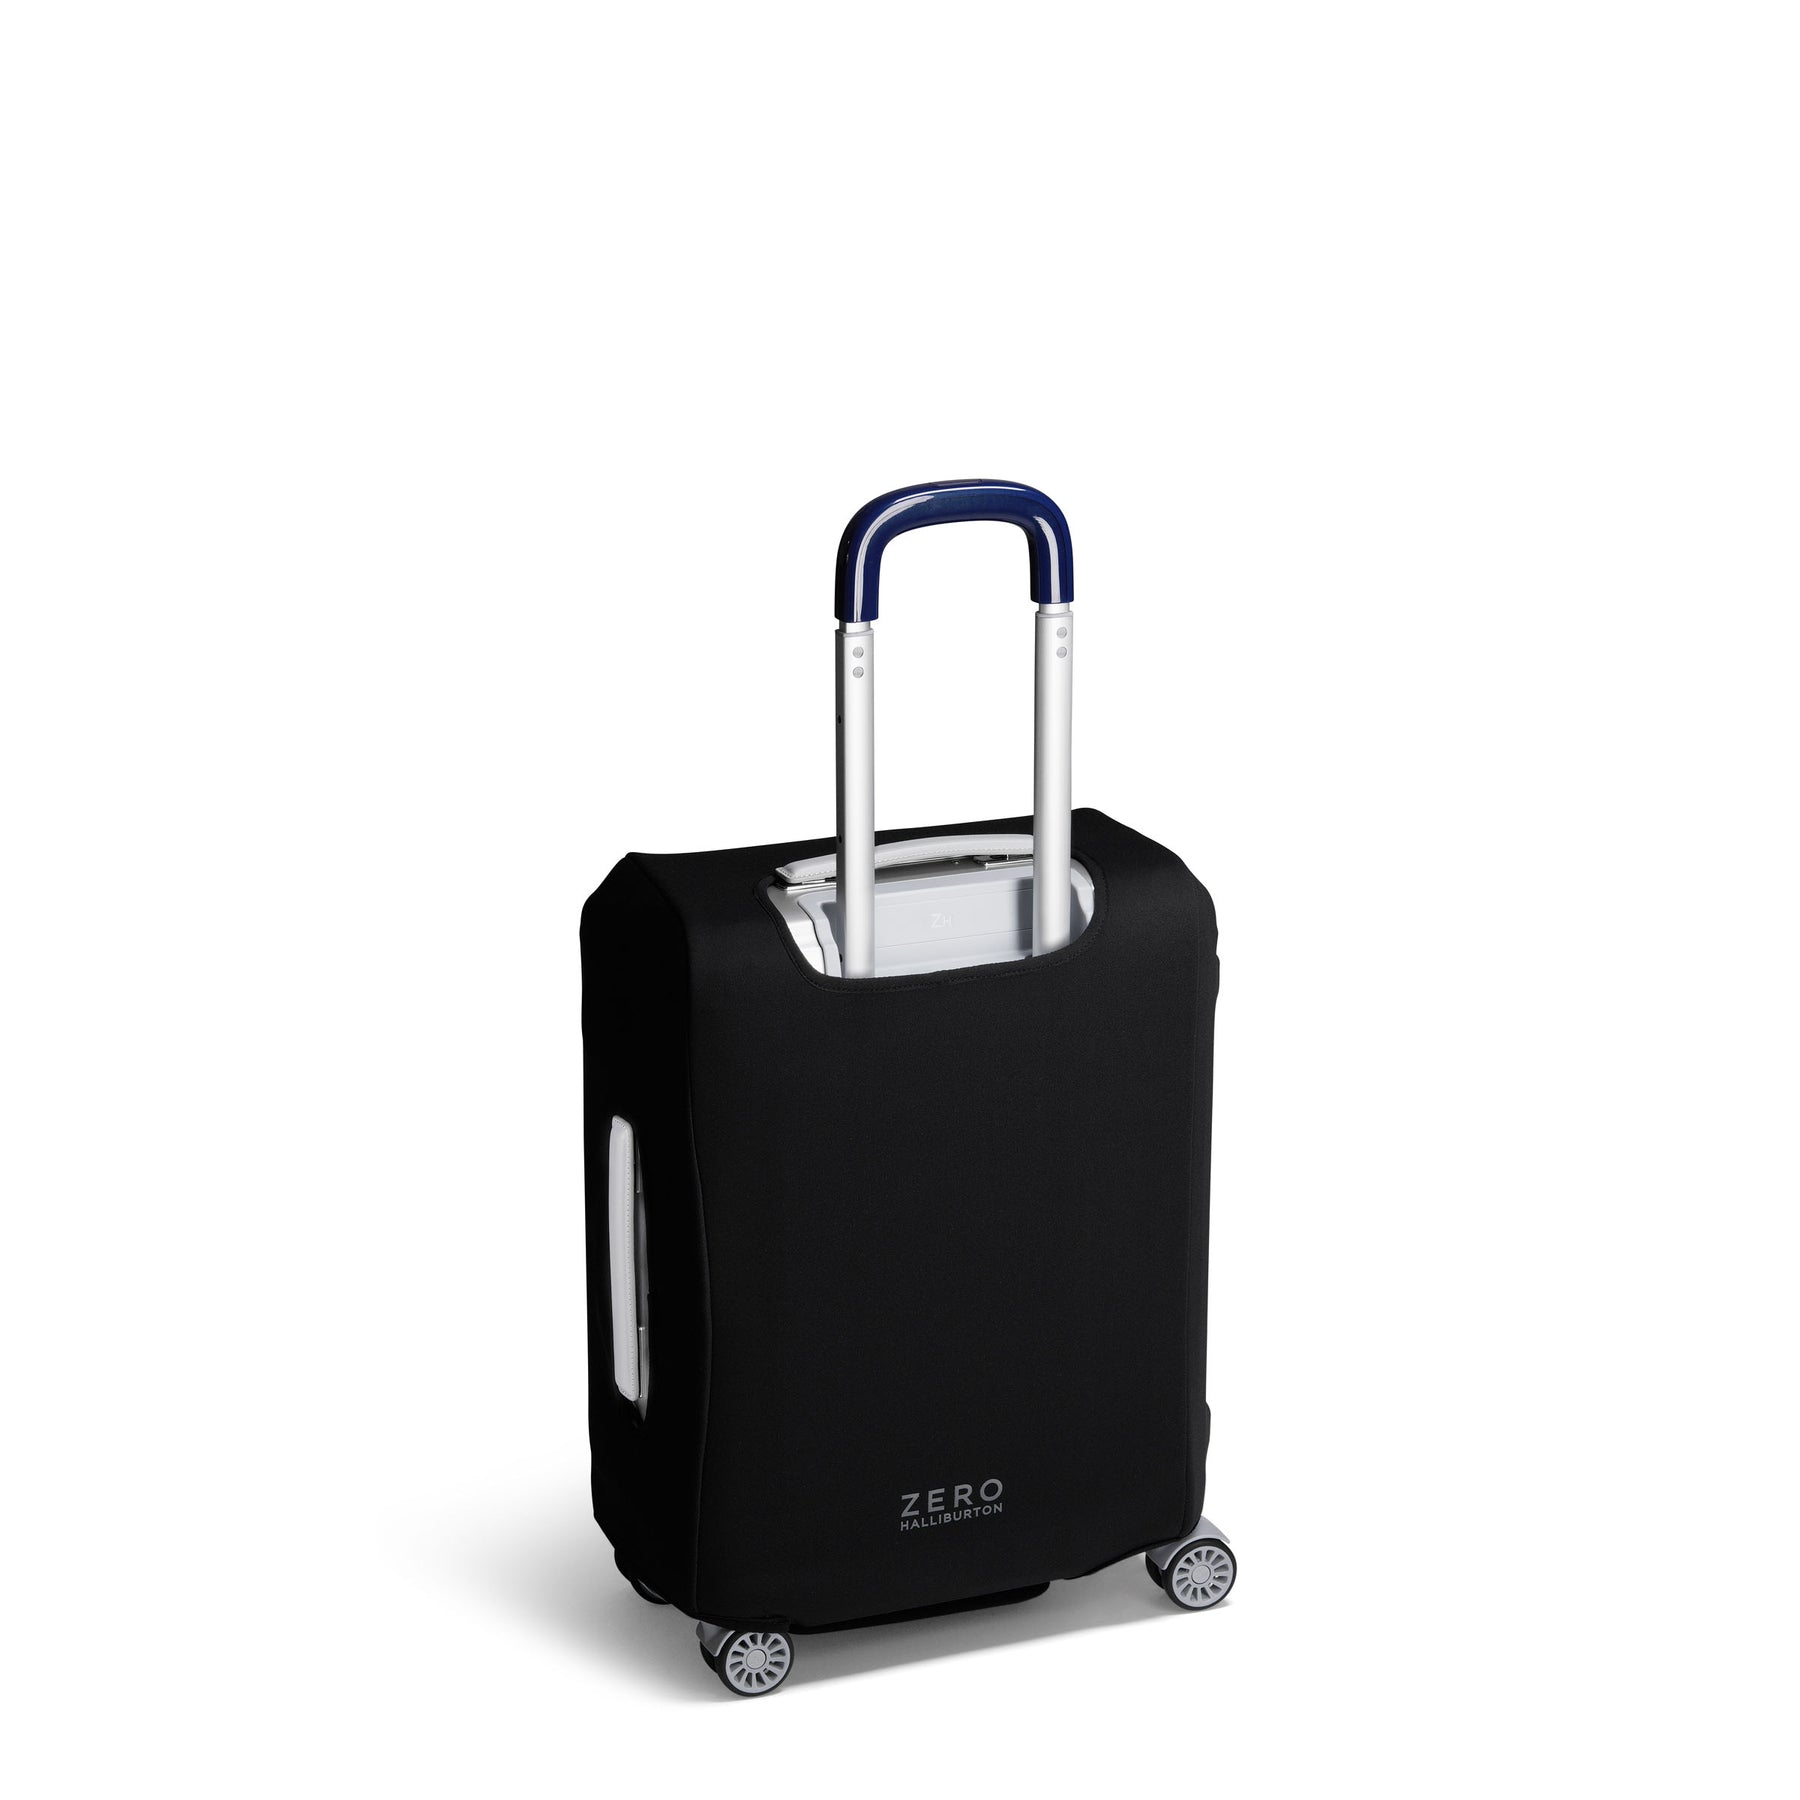 Accessories | Luggage Cover International